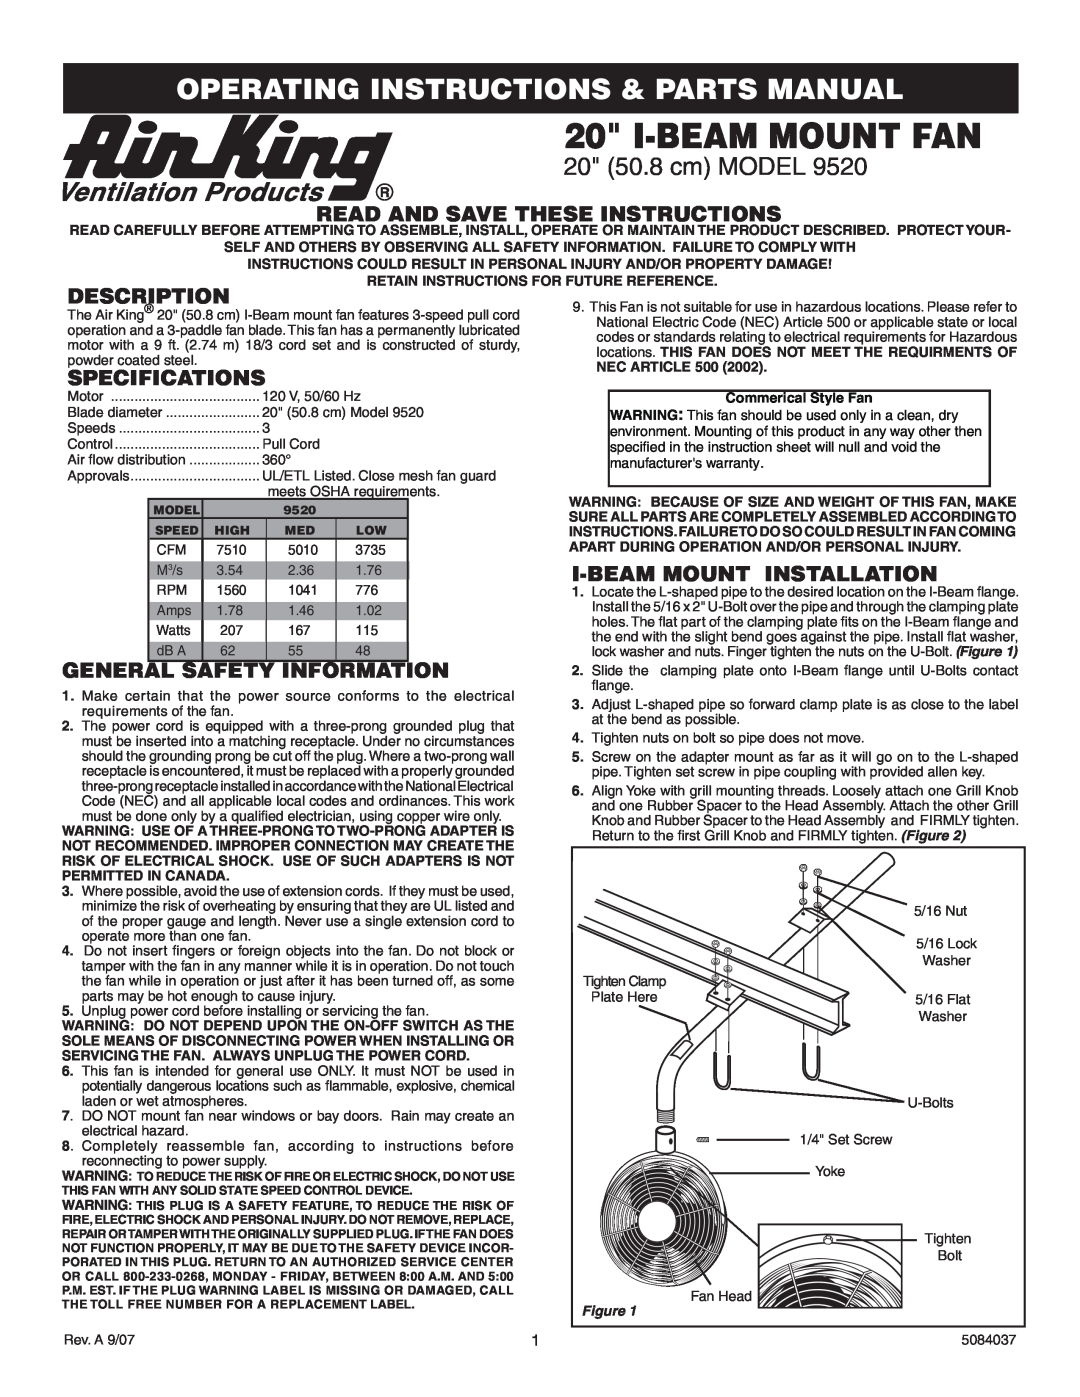 Air King 9520 operating instructions Operating Instructions & Parts Manual, Read And Save These Instructions, Description 